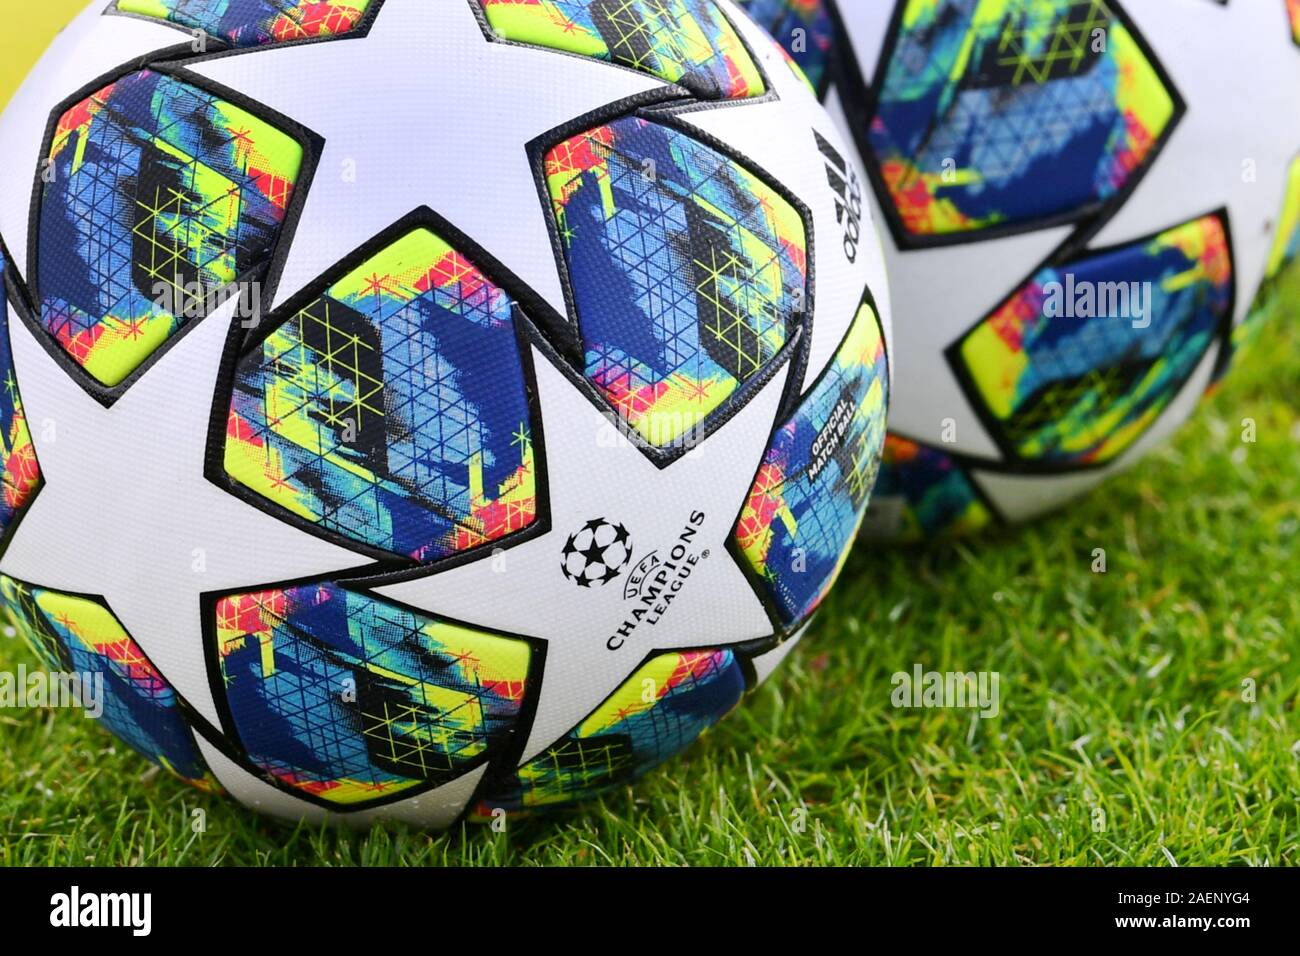 Close up of adidas champions league football hi-res stock photography and  images - Alamy